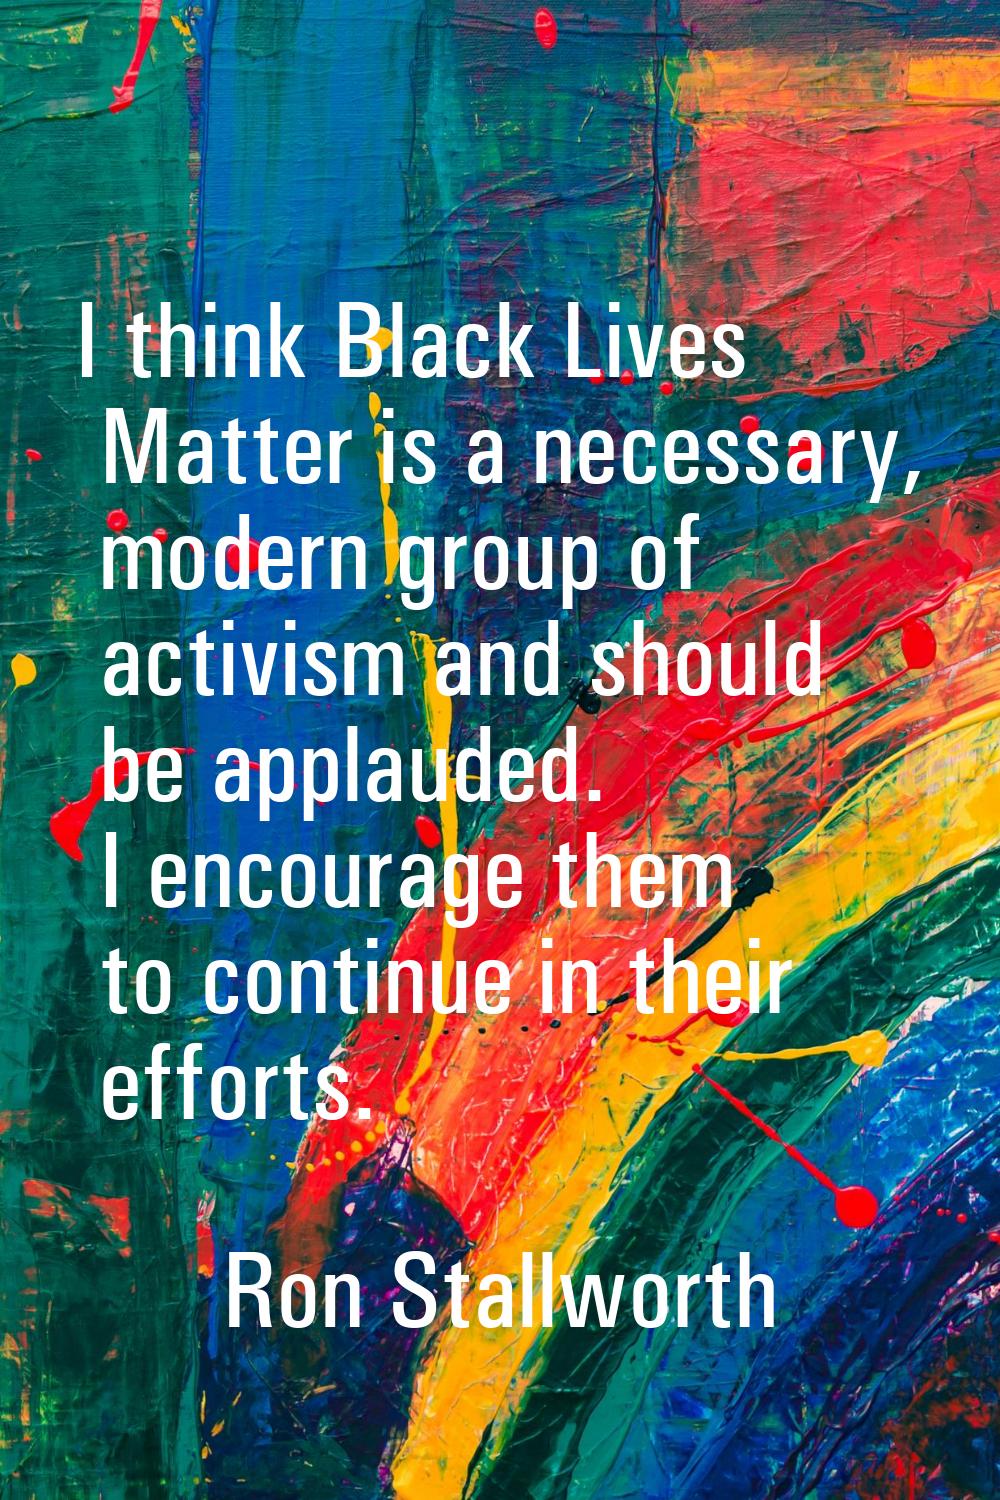 I think Black Lives Matter is a necessary, modern group of activism and should be applauded. I enco